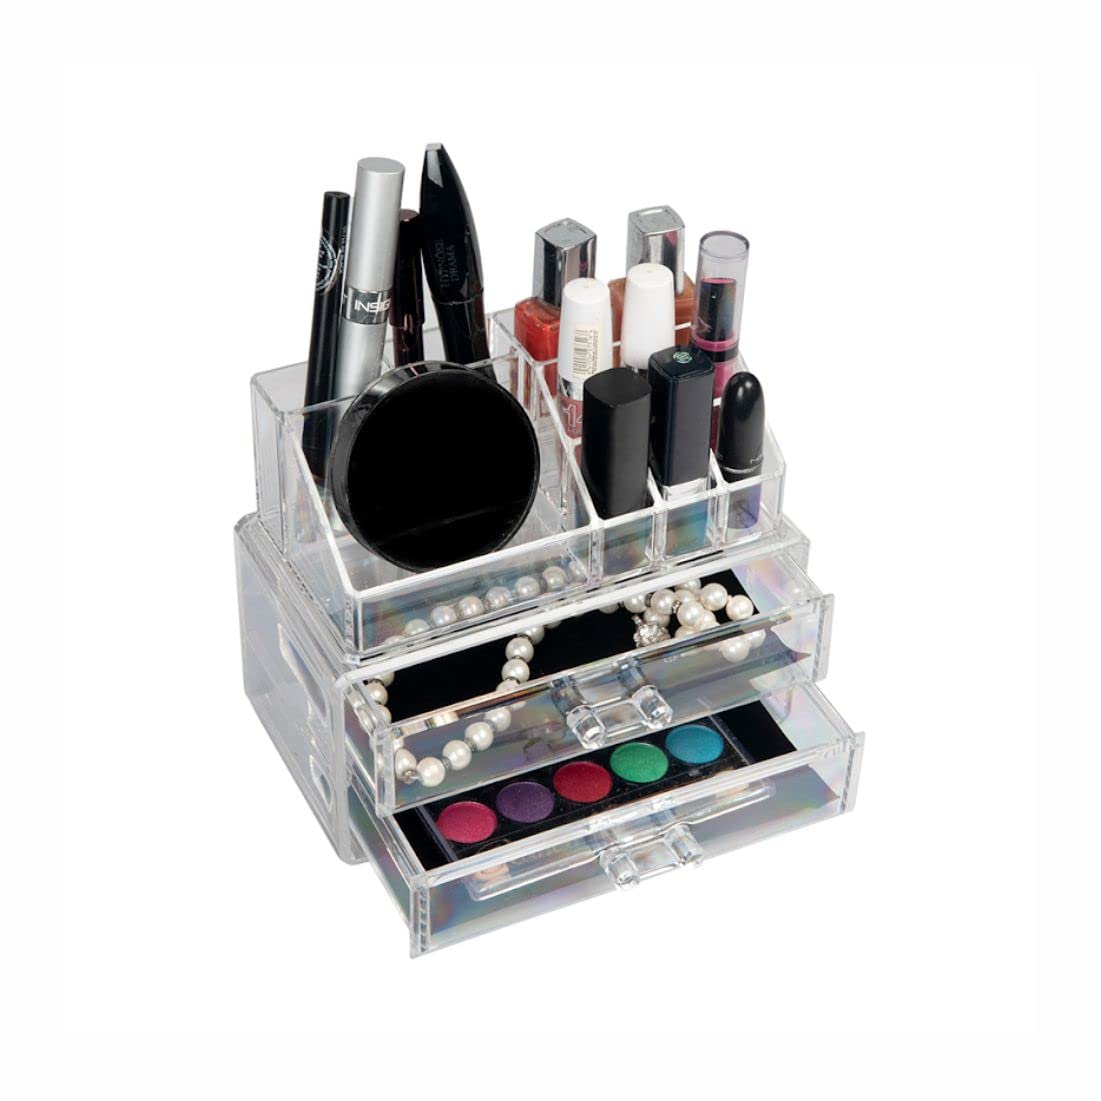 Cosmetic/ Makeup Organizer Storage with 2 Small Drawers